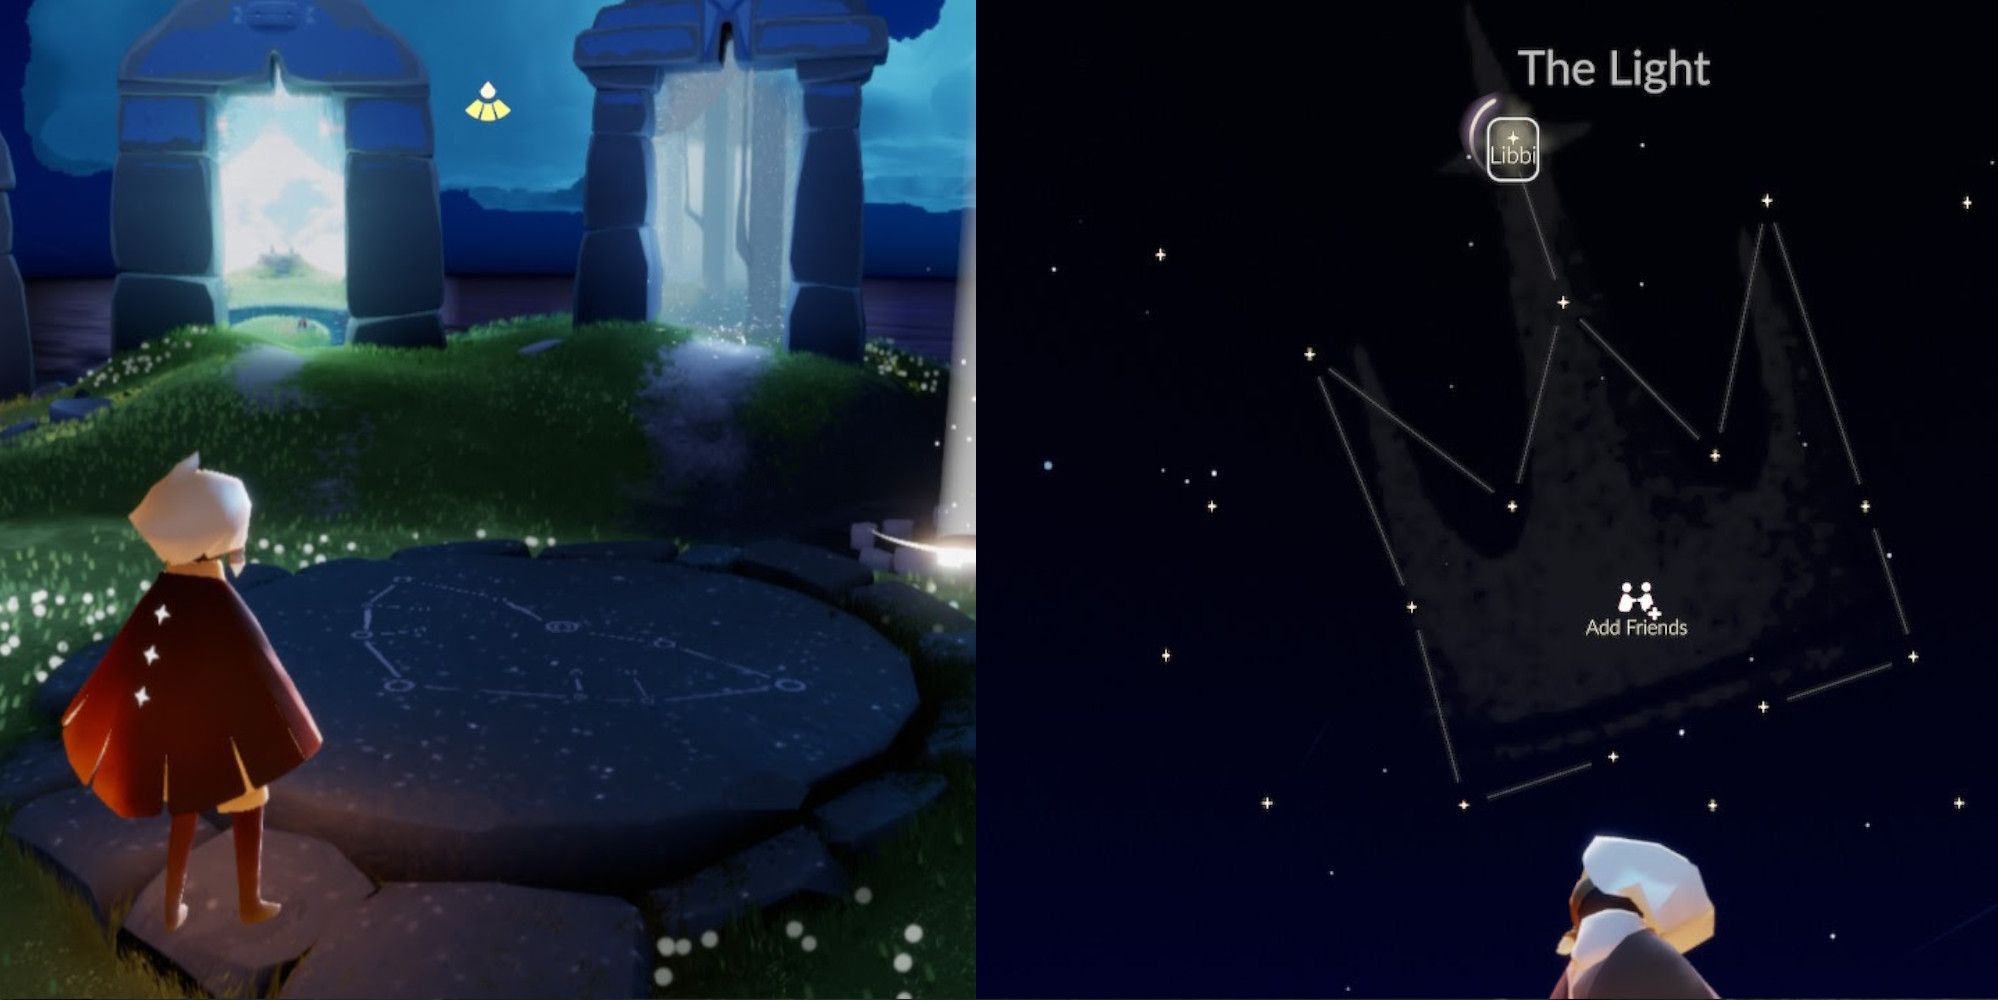 sky stone circle on home island and constellation, split image with the former on the right and the latter on the left